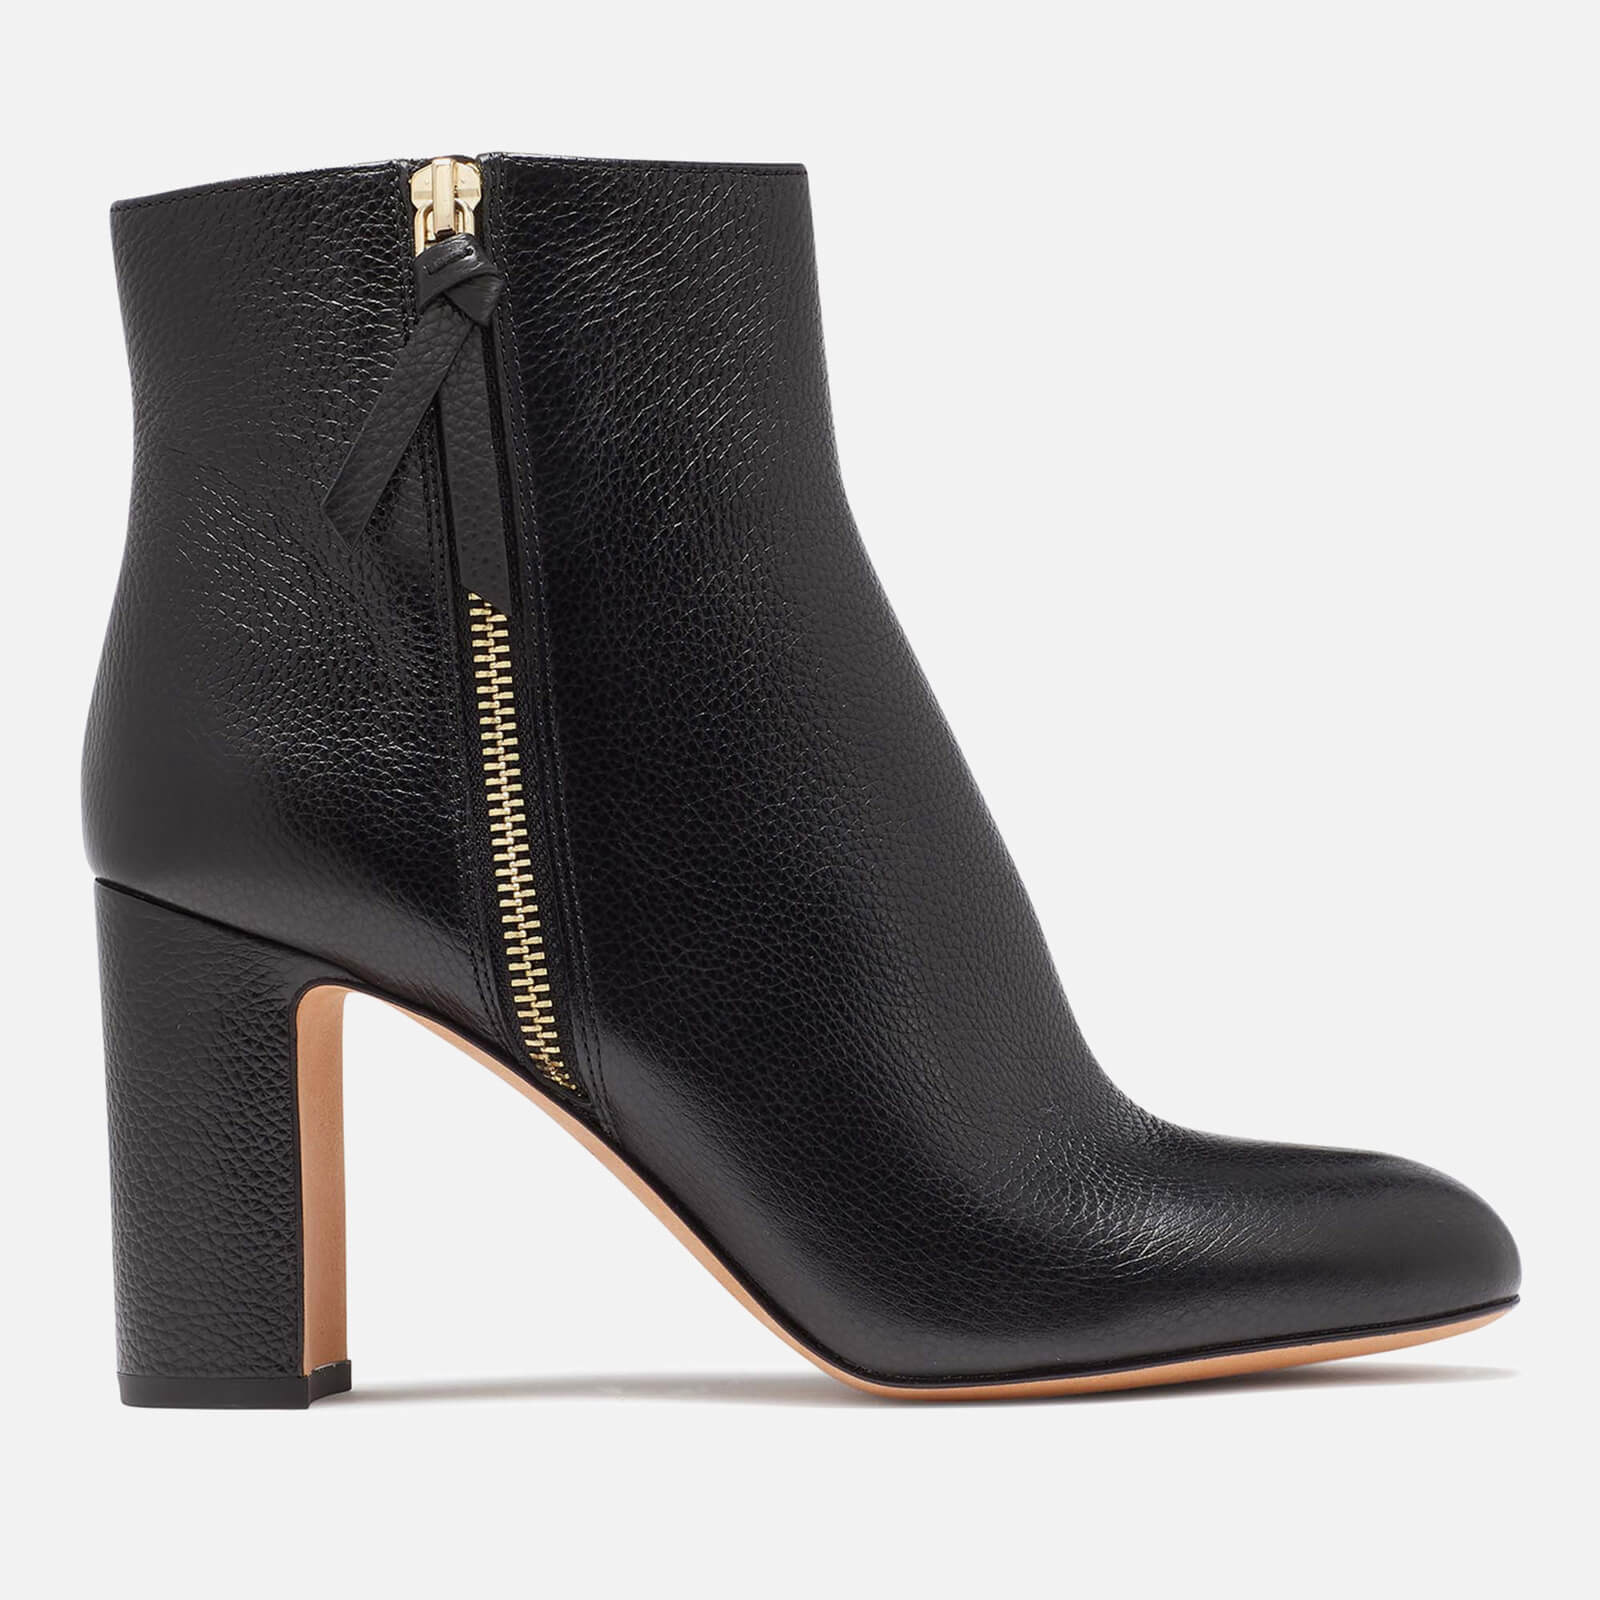 kate spade new york women's leather heeled ankle boots - uk 4